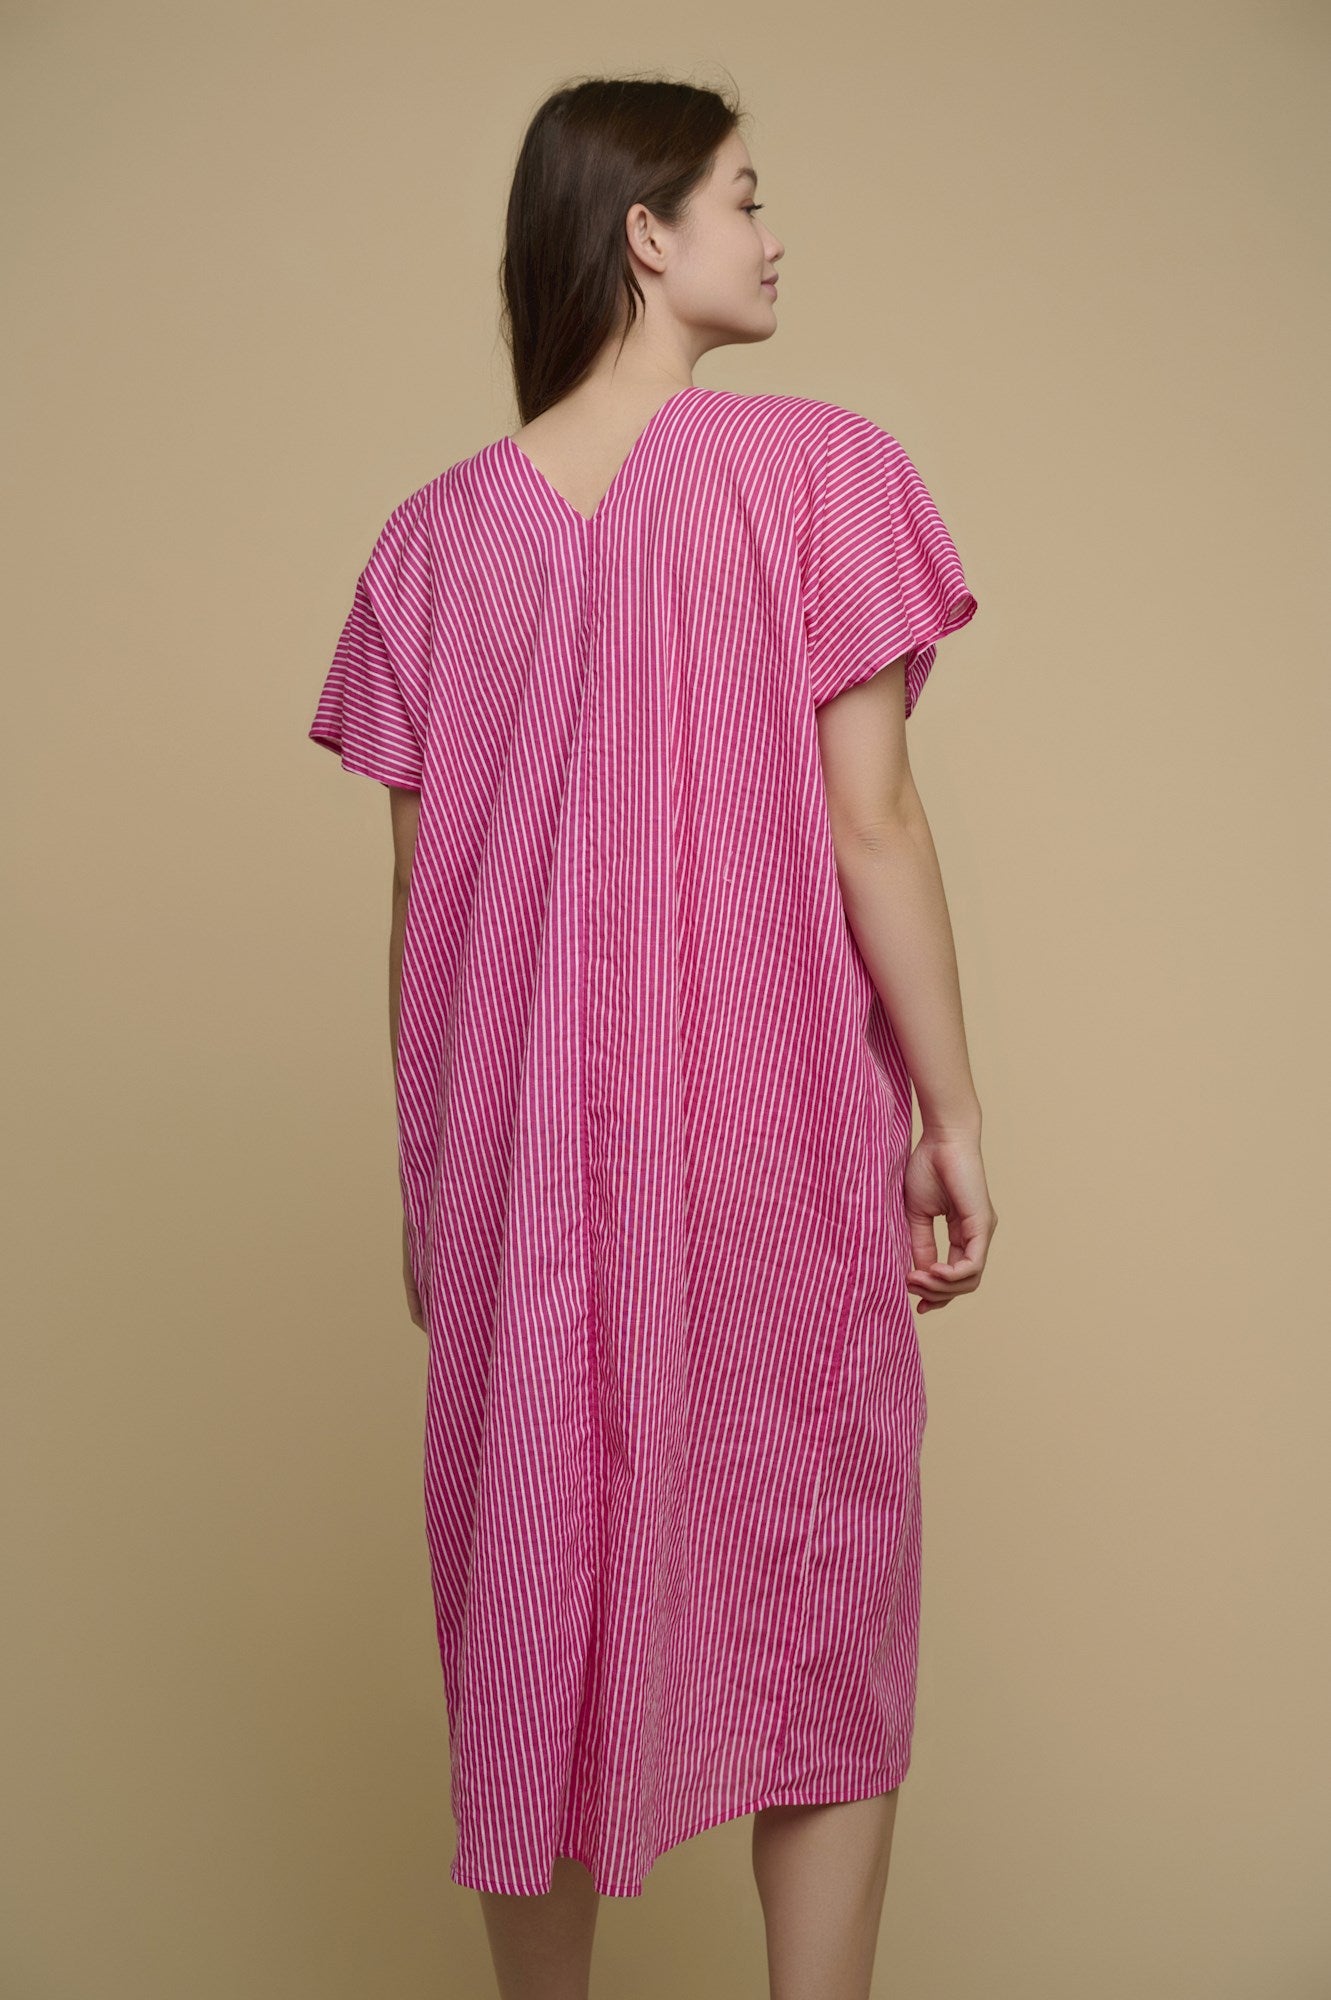 Model is wearing Tuvana Cover Up in pink stripe from rino and pelle back view